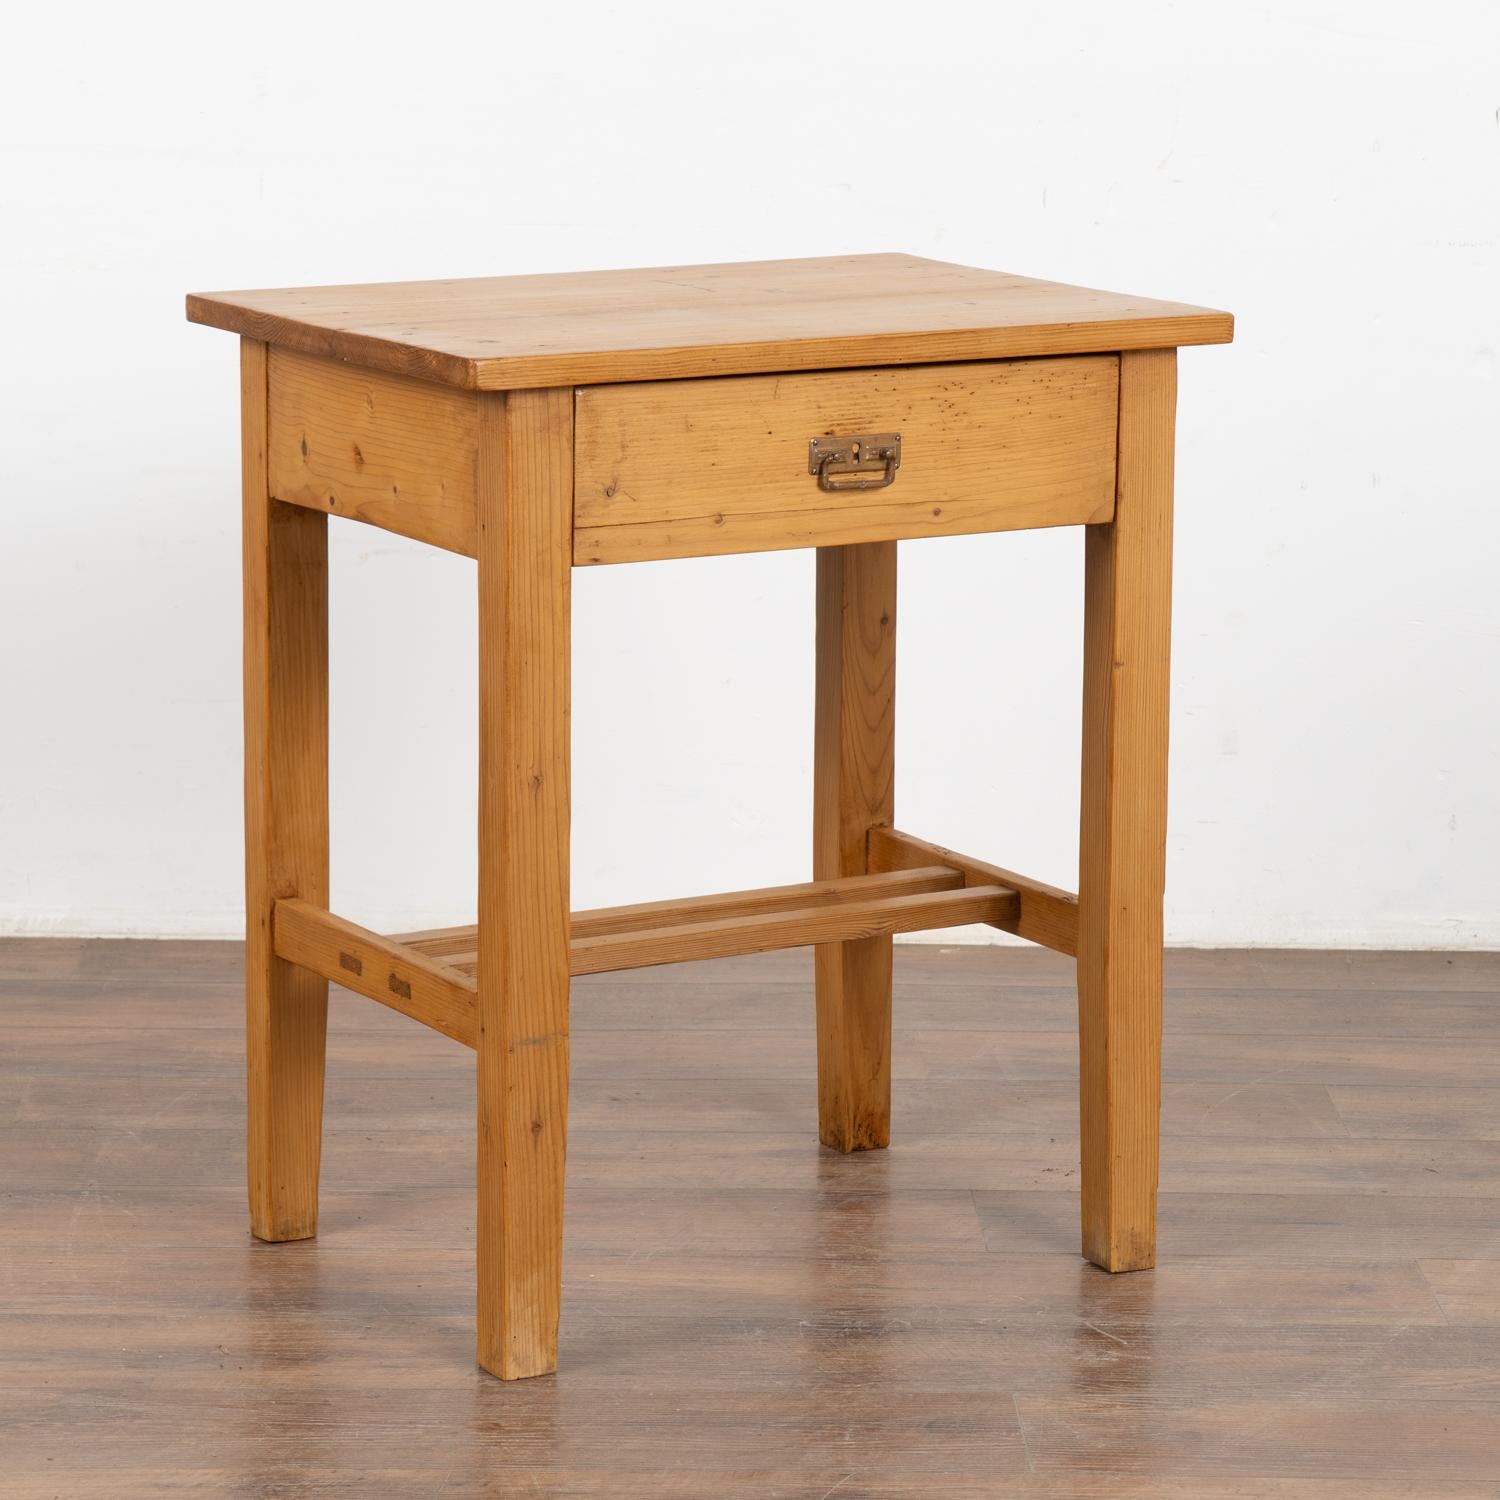 This delightful country pine table with single drawer will make a casual side table or nightstand. 
This table has been restored, the drawer function with brass pull and it is ready to be used and enjoyed.
Any scratches, cracks, dings, or age